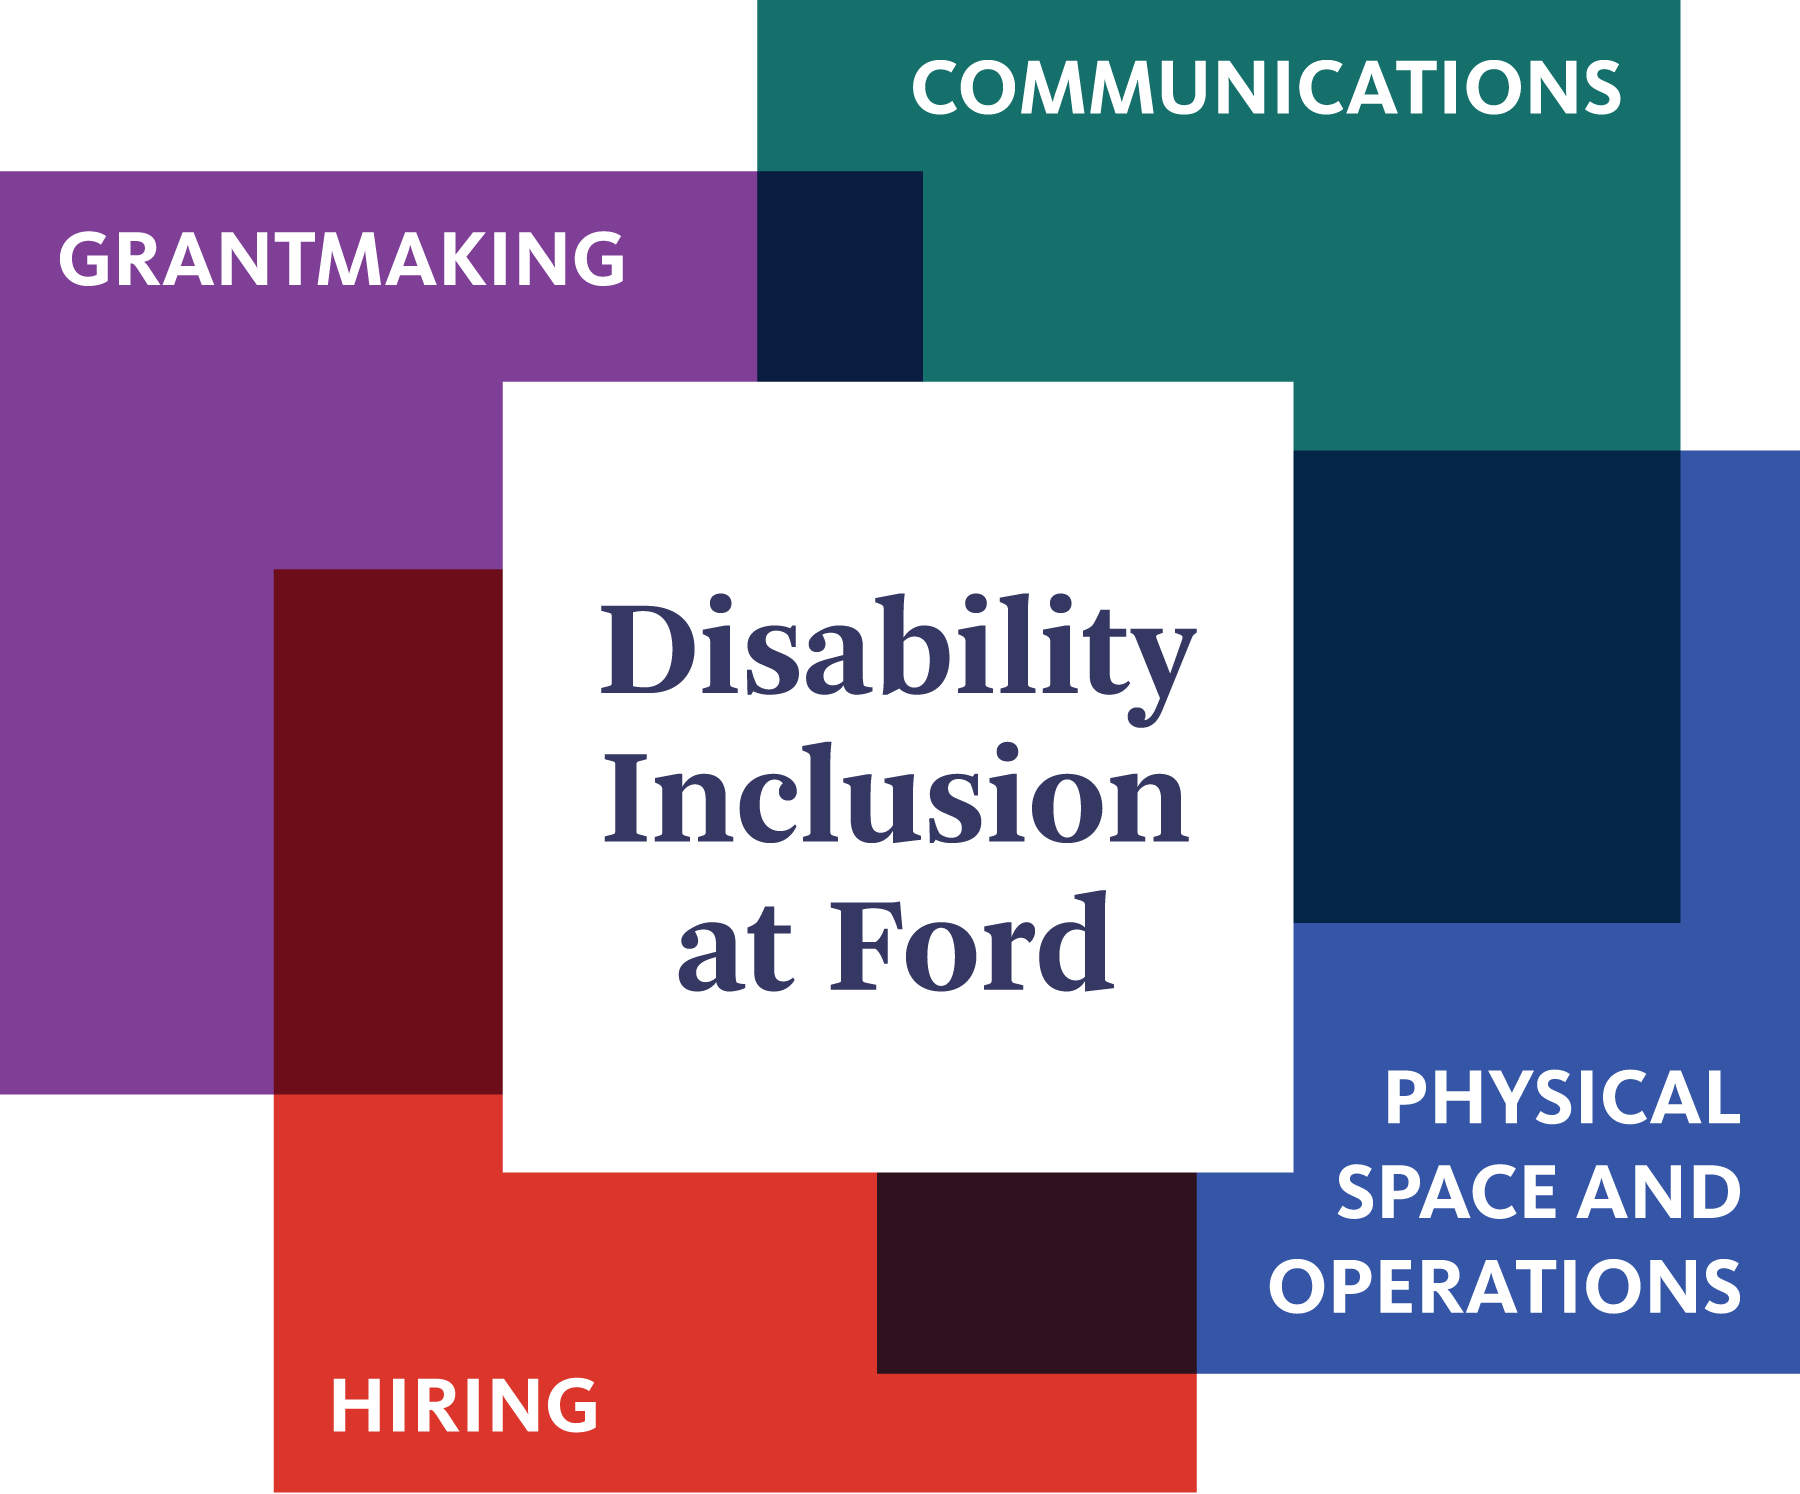 A figure summarizing the Ford Foundation's commitment to disability with a white square at center reading "Disability Inclusion at Ford" with four multi-colored squares around it noting the areas of focus including grantmaking, communications, physical space and operations, and hiring.